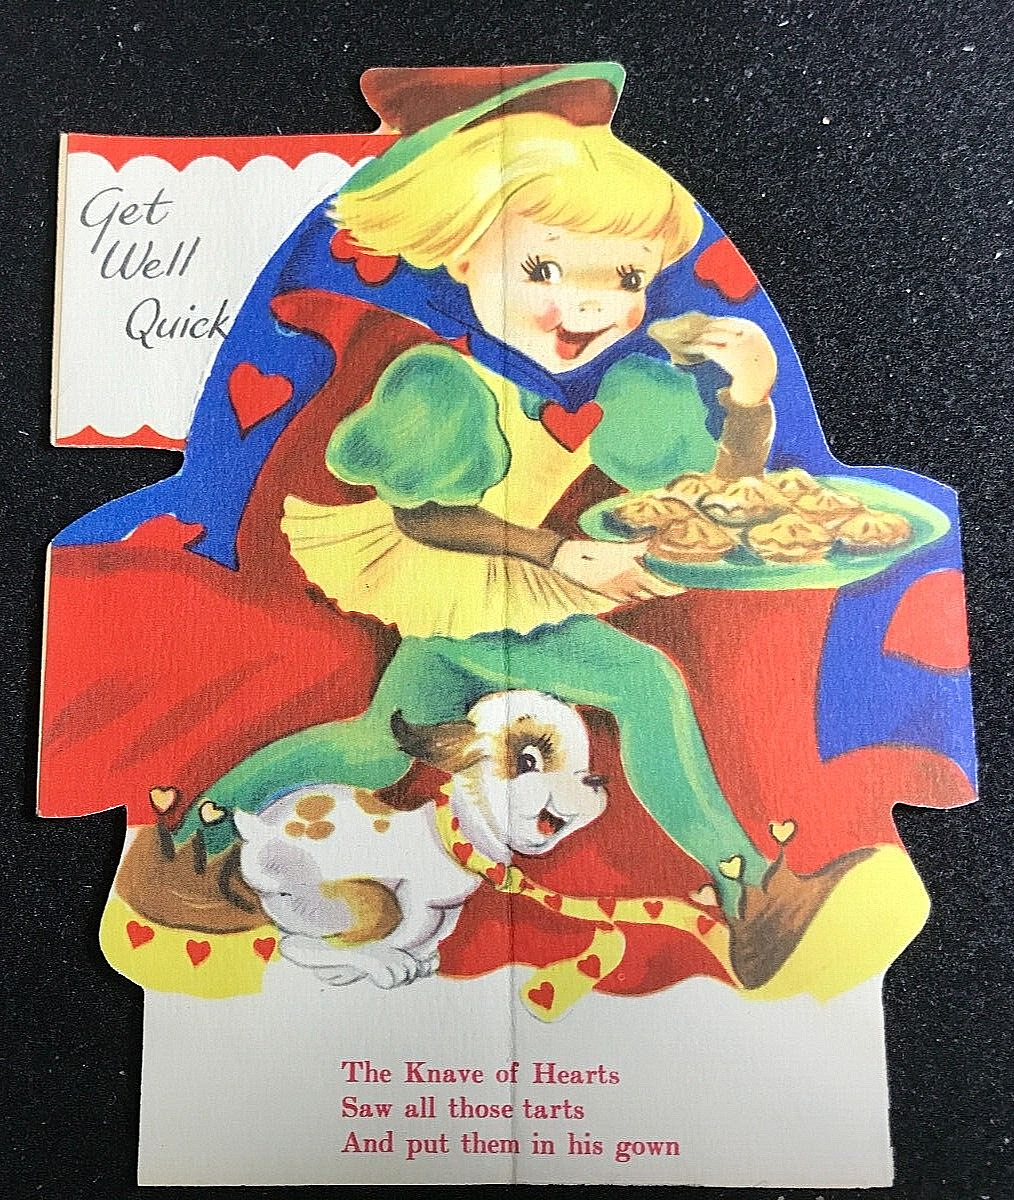 (C97) Vintage Get Well Quick Knave of Hearts  Greeting Card - 40\'s/50\'s -unused